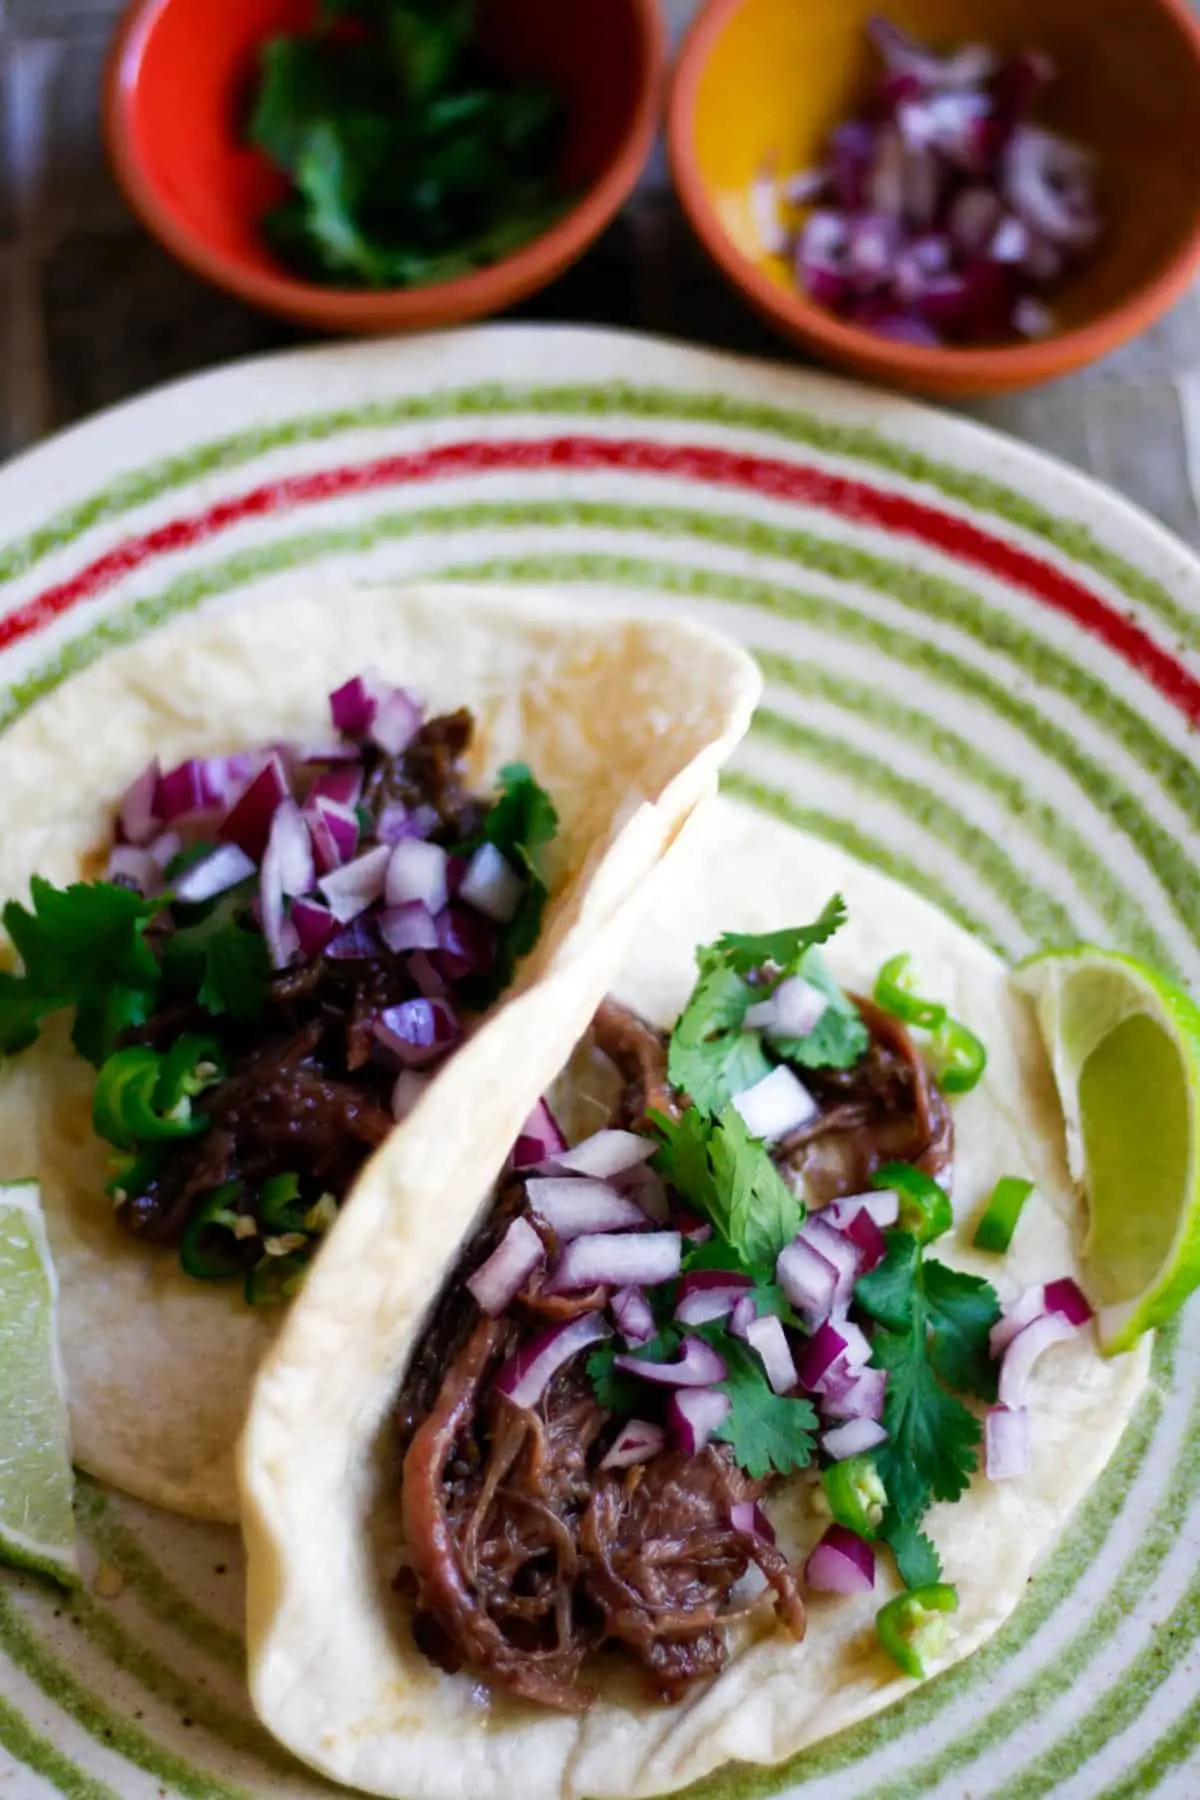 Barbacoa tacos garnished with cilantro, red onion, chilis, and lime on a plate with green and red concentric circles. There are bowls containing cilantro and diced red onion in the background.